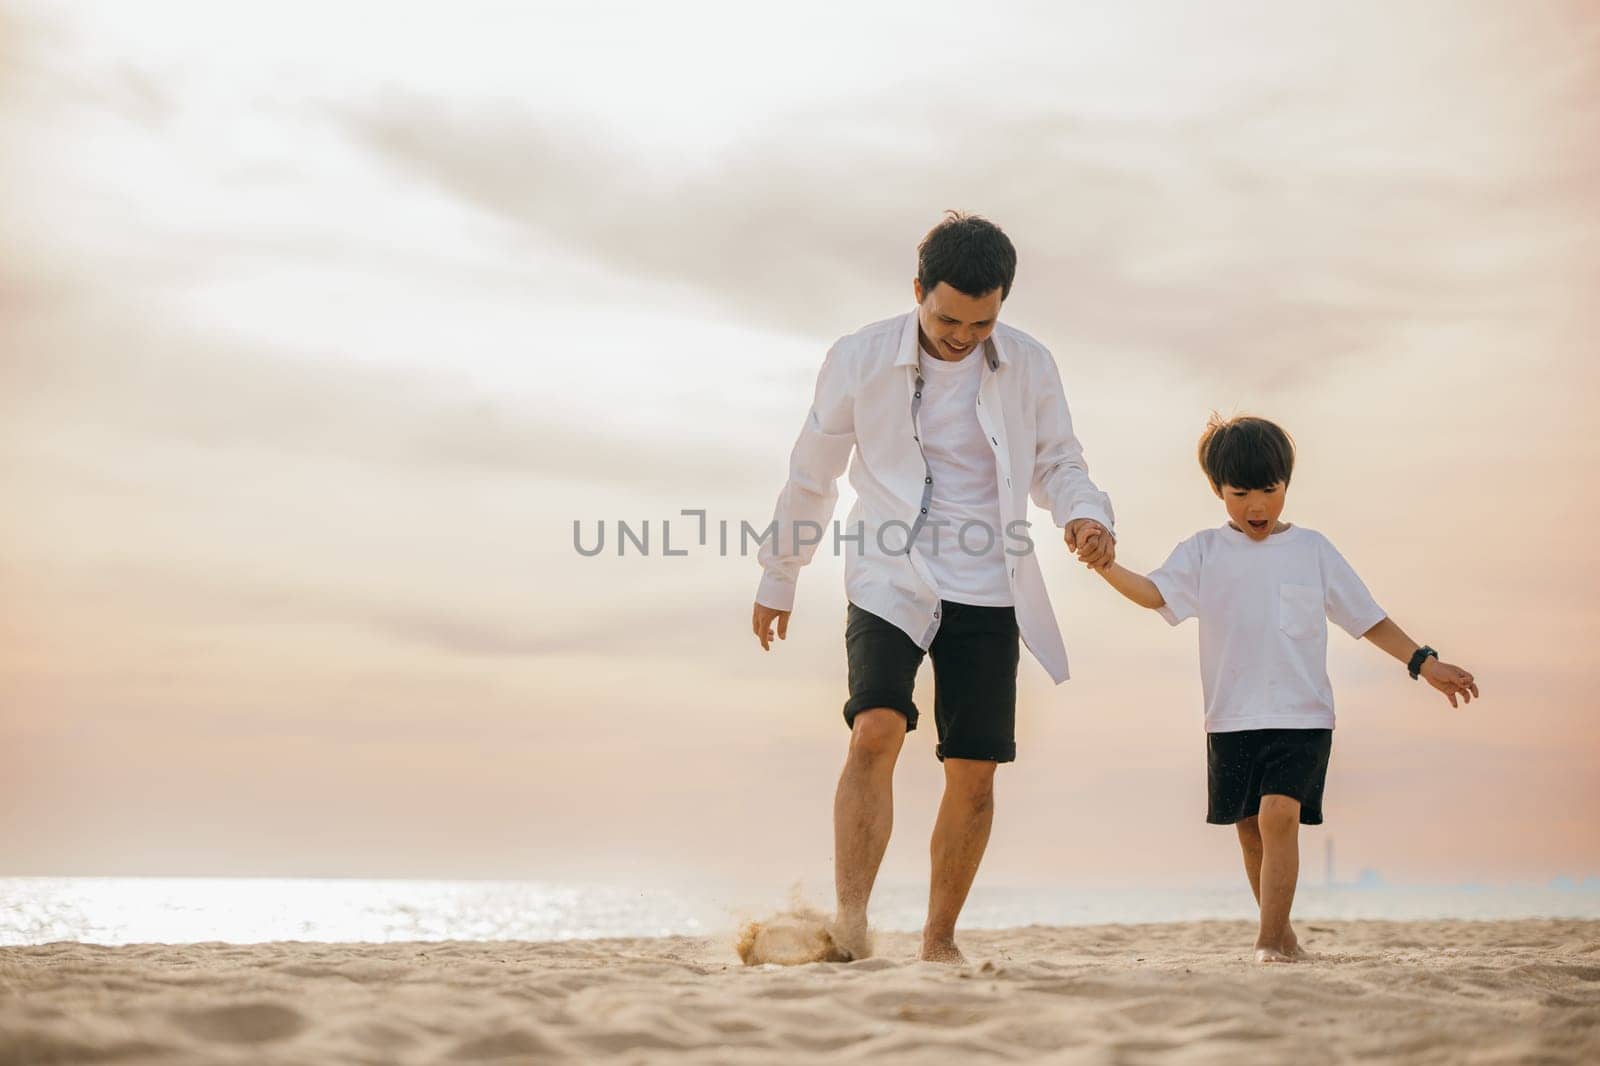 Beach fun with a cheerful Asian father and son running hand in hand. Laughing playing and enjoying the sun this family moment is full of joy and togetherness.